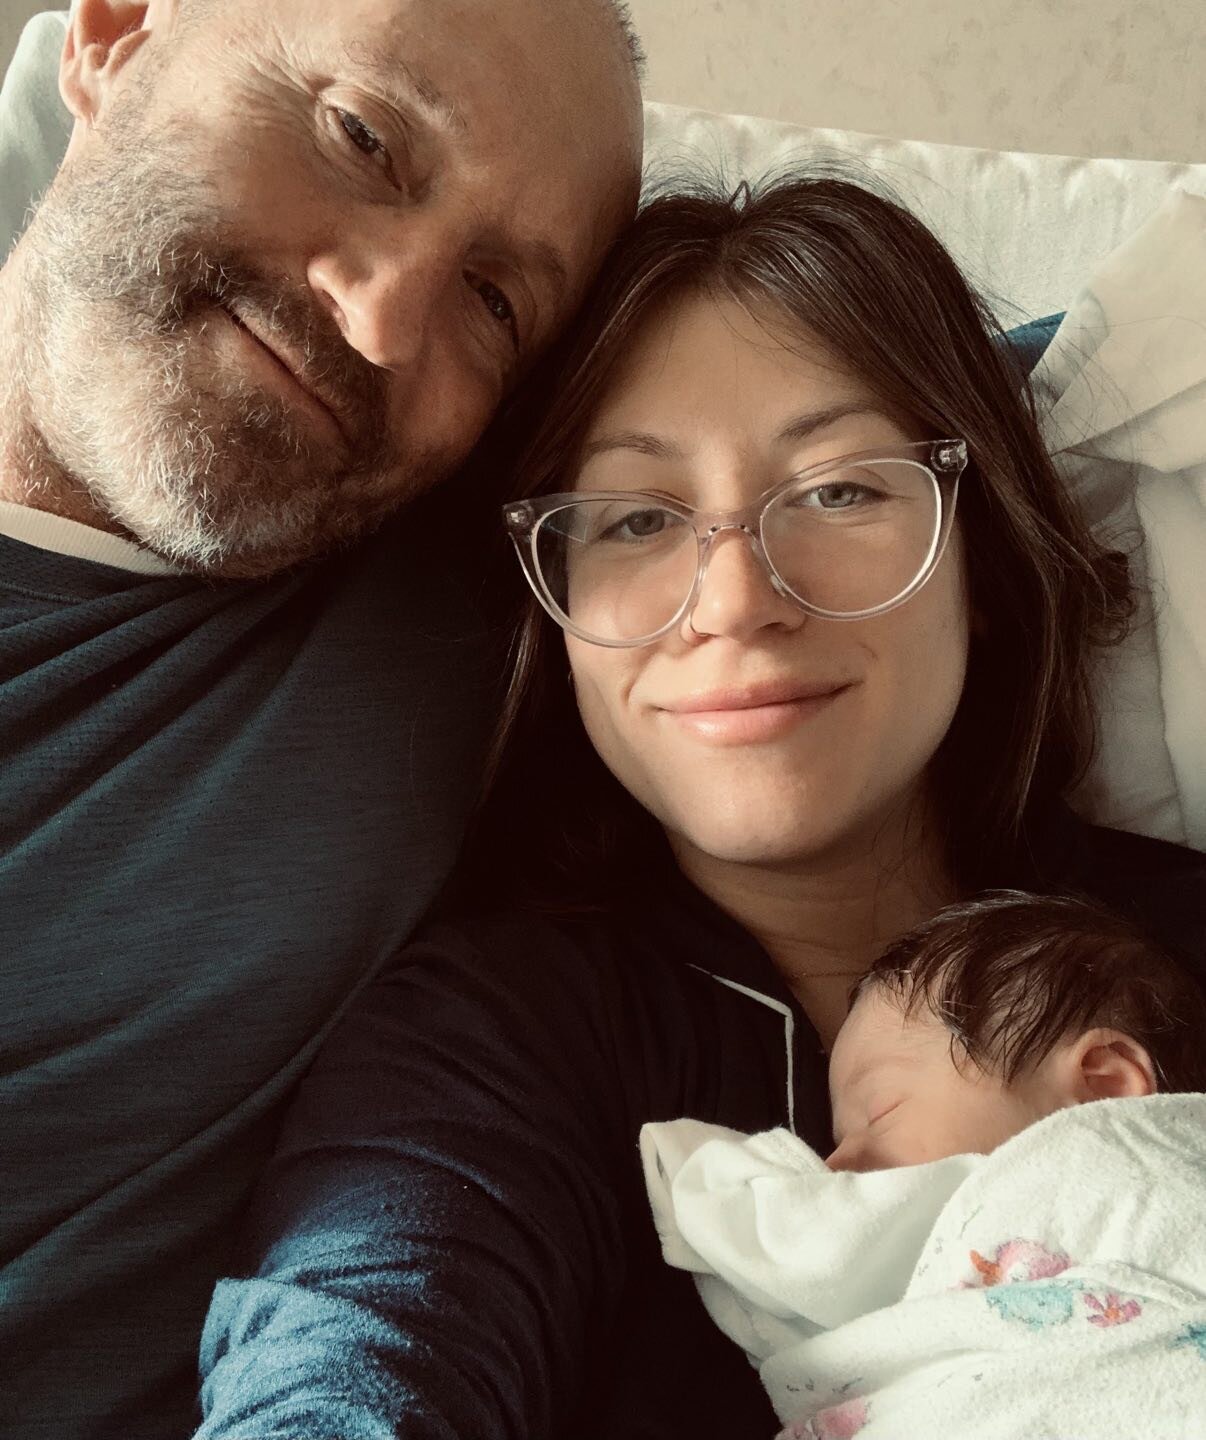 John, baby girl &amp; I the day Naomi was born 💕.

If you would have told me PPMAD (Postpartum Mood &amp; Anxiety Disorder) would have been part of my (&amp; family&rsquo;s) journey - I wouldn&rsquo;t have believed you.

Each pregnancy looks so diff